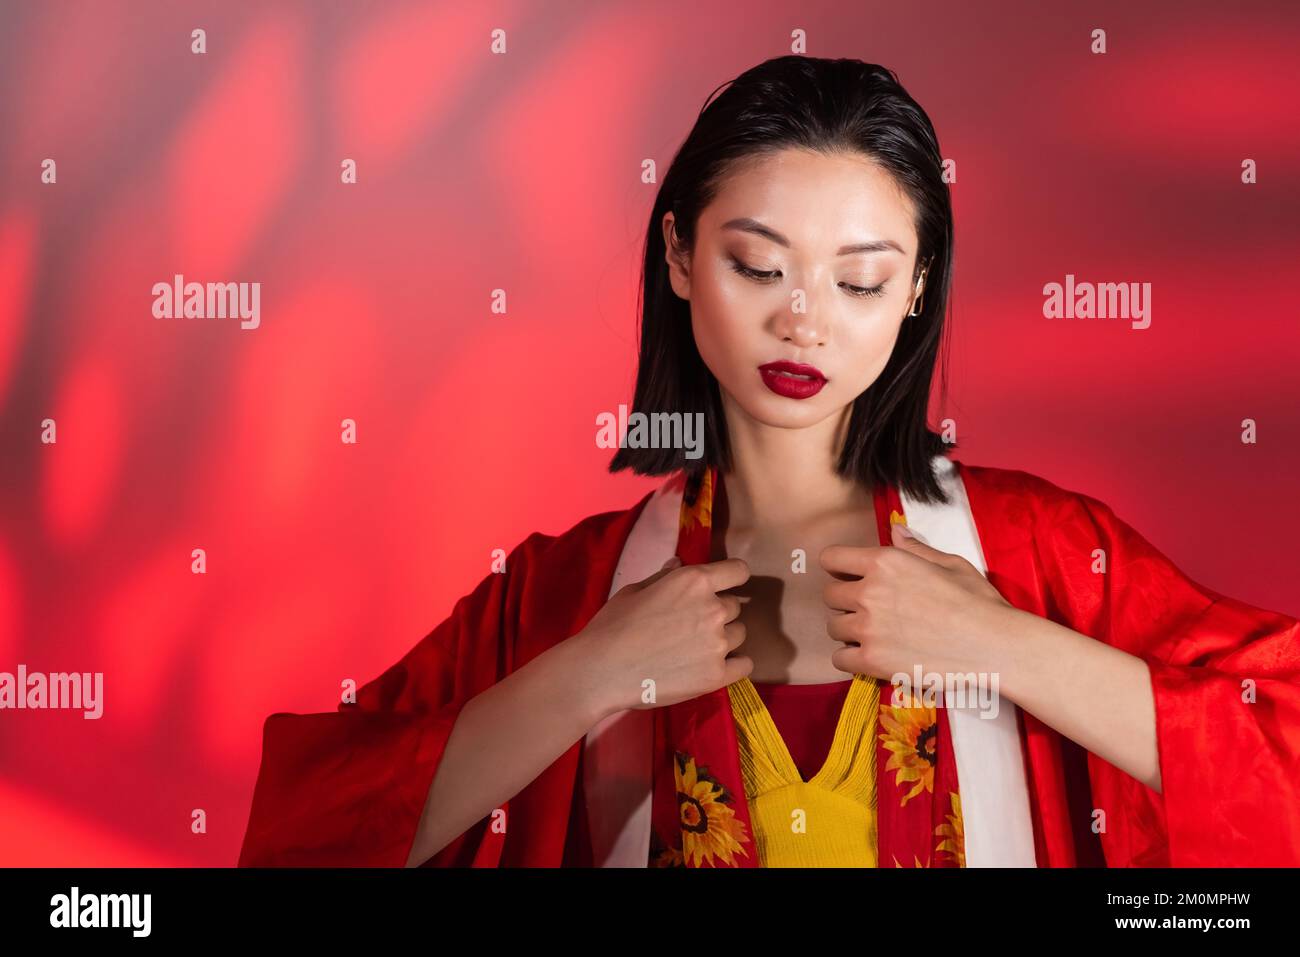 young asian woman in kimono cape touching neckerchief with floral print on abstract background with red gradient,stock image Stock Photo